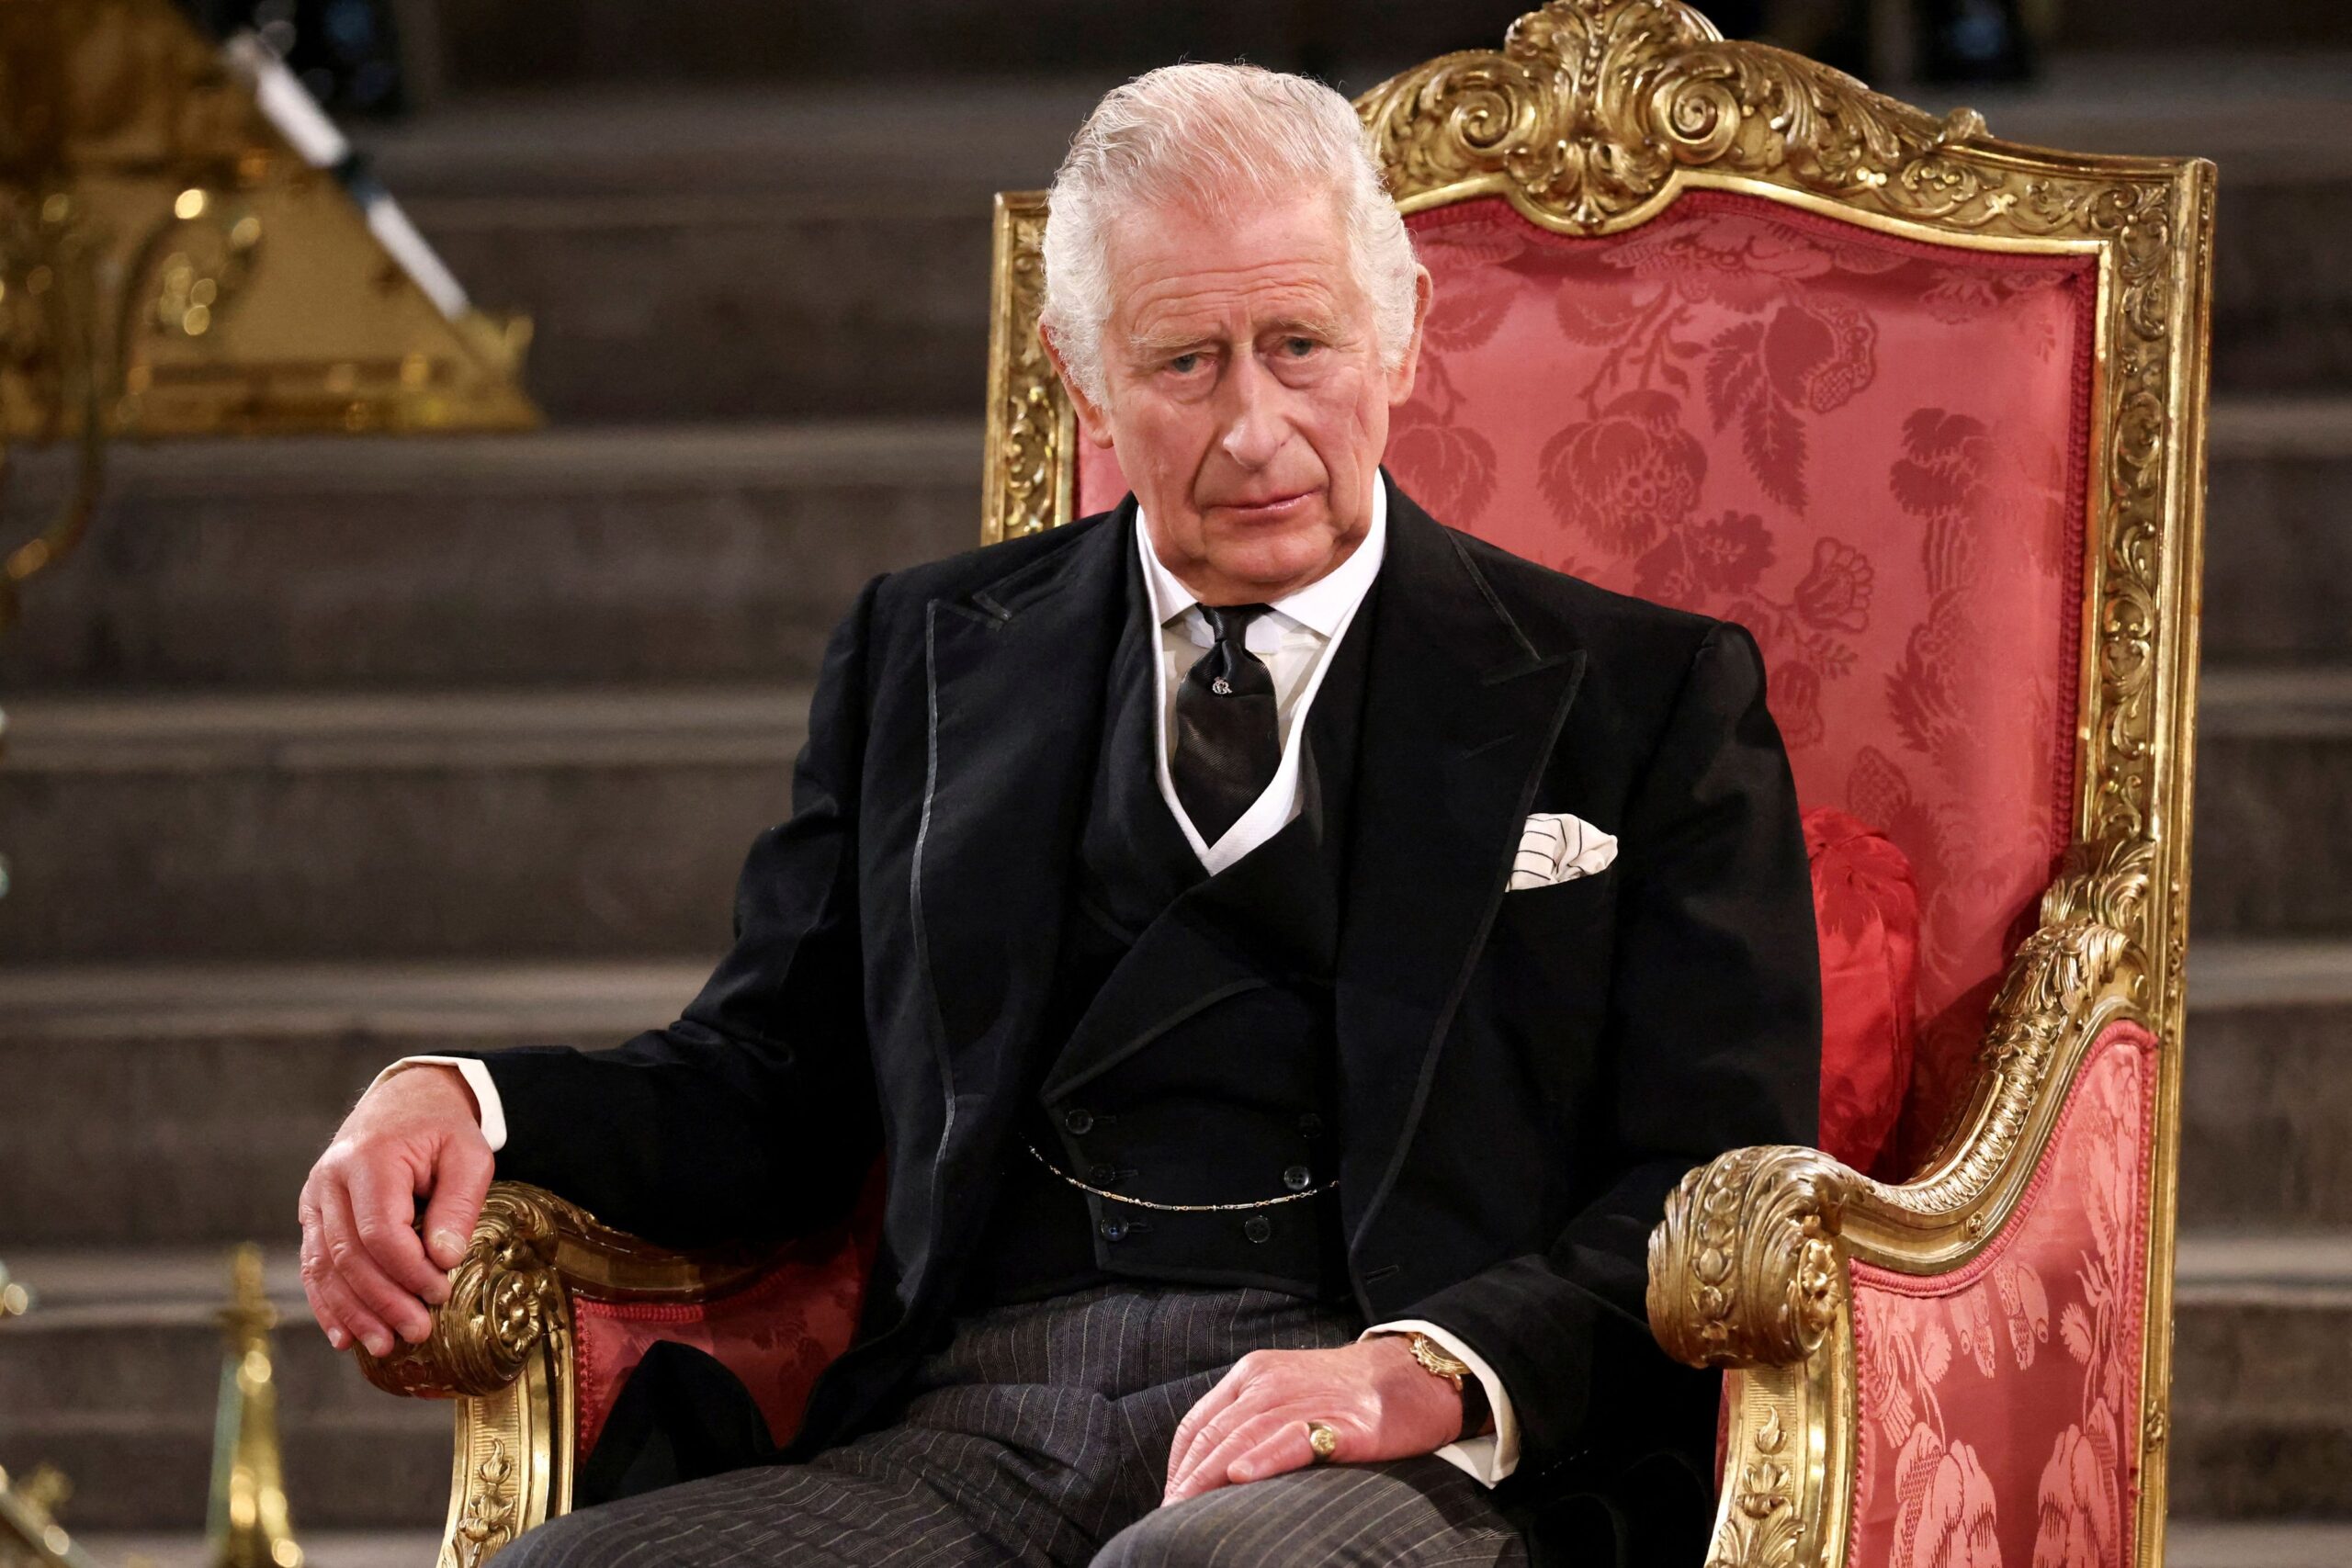 King Charles III attends the presentation of Addresses by both Houses of Parliament in Westminster Hall, central London on September 12, 2022. | Source: Getty Images